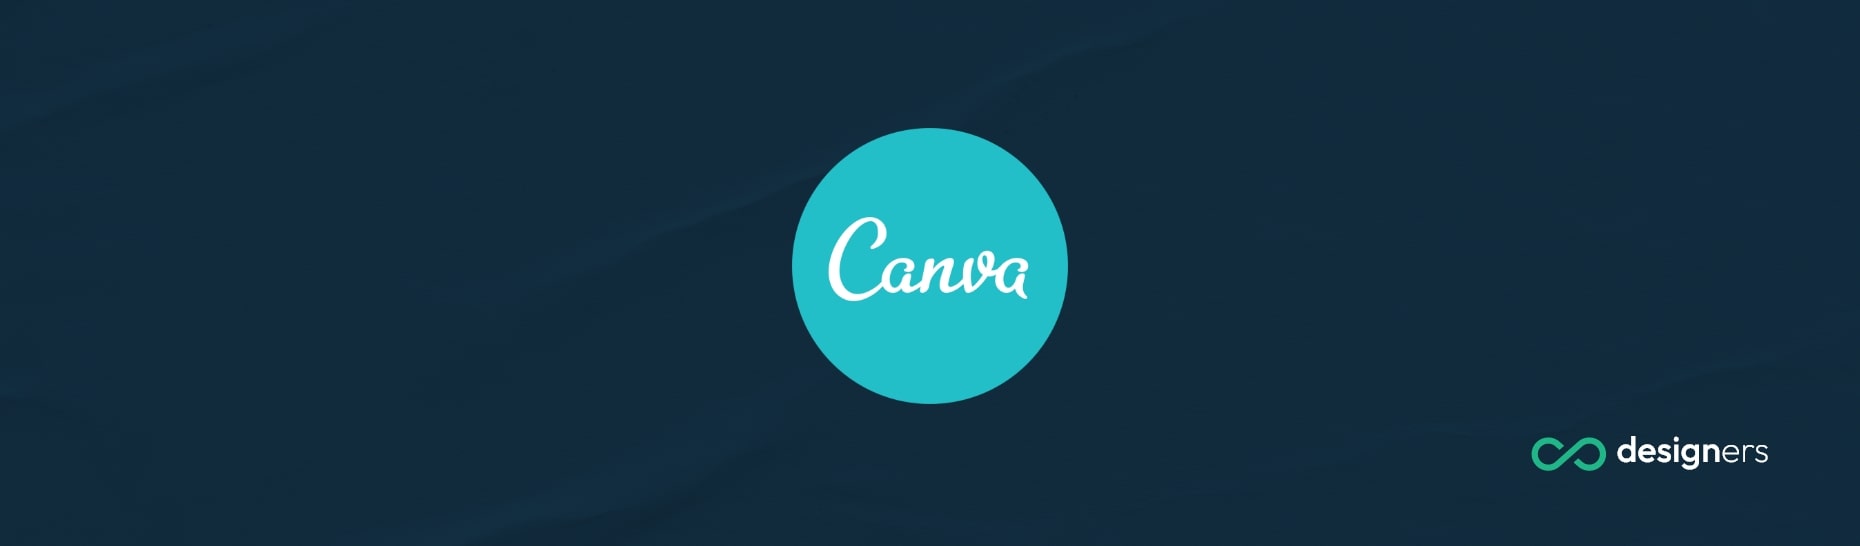 Can Canva Do Video Editing?